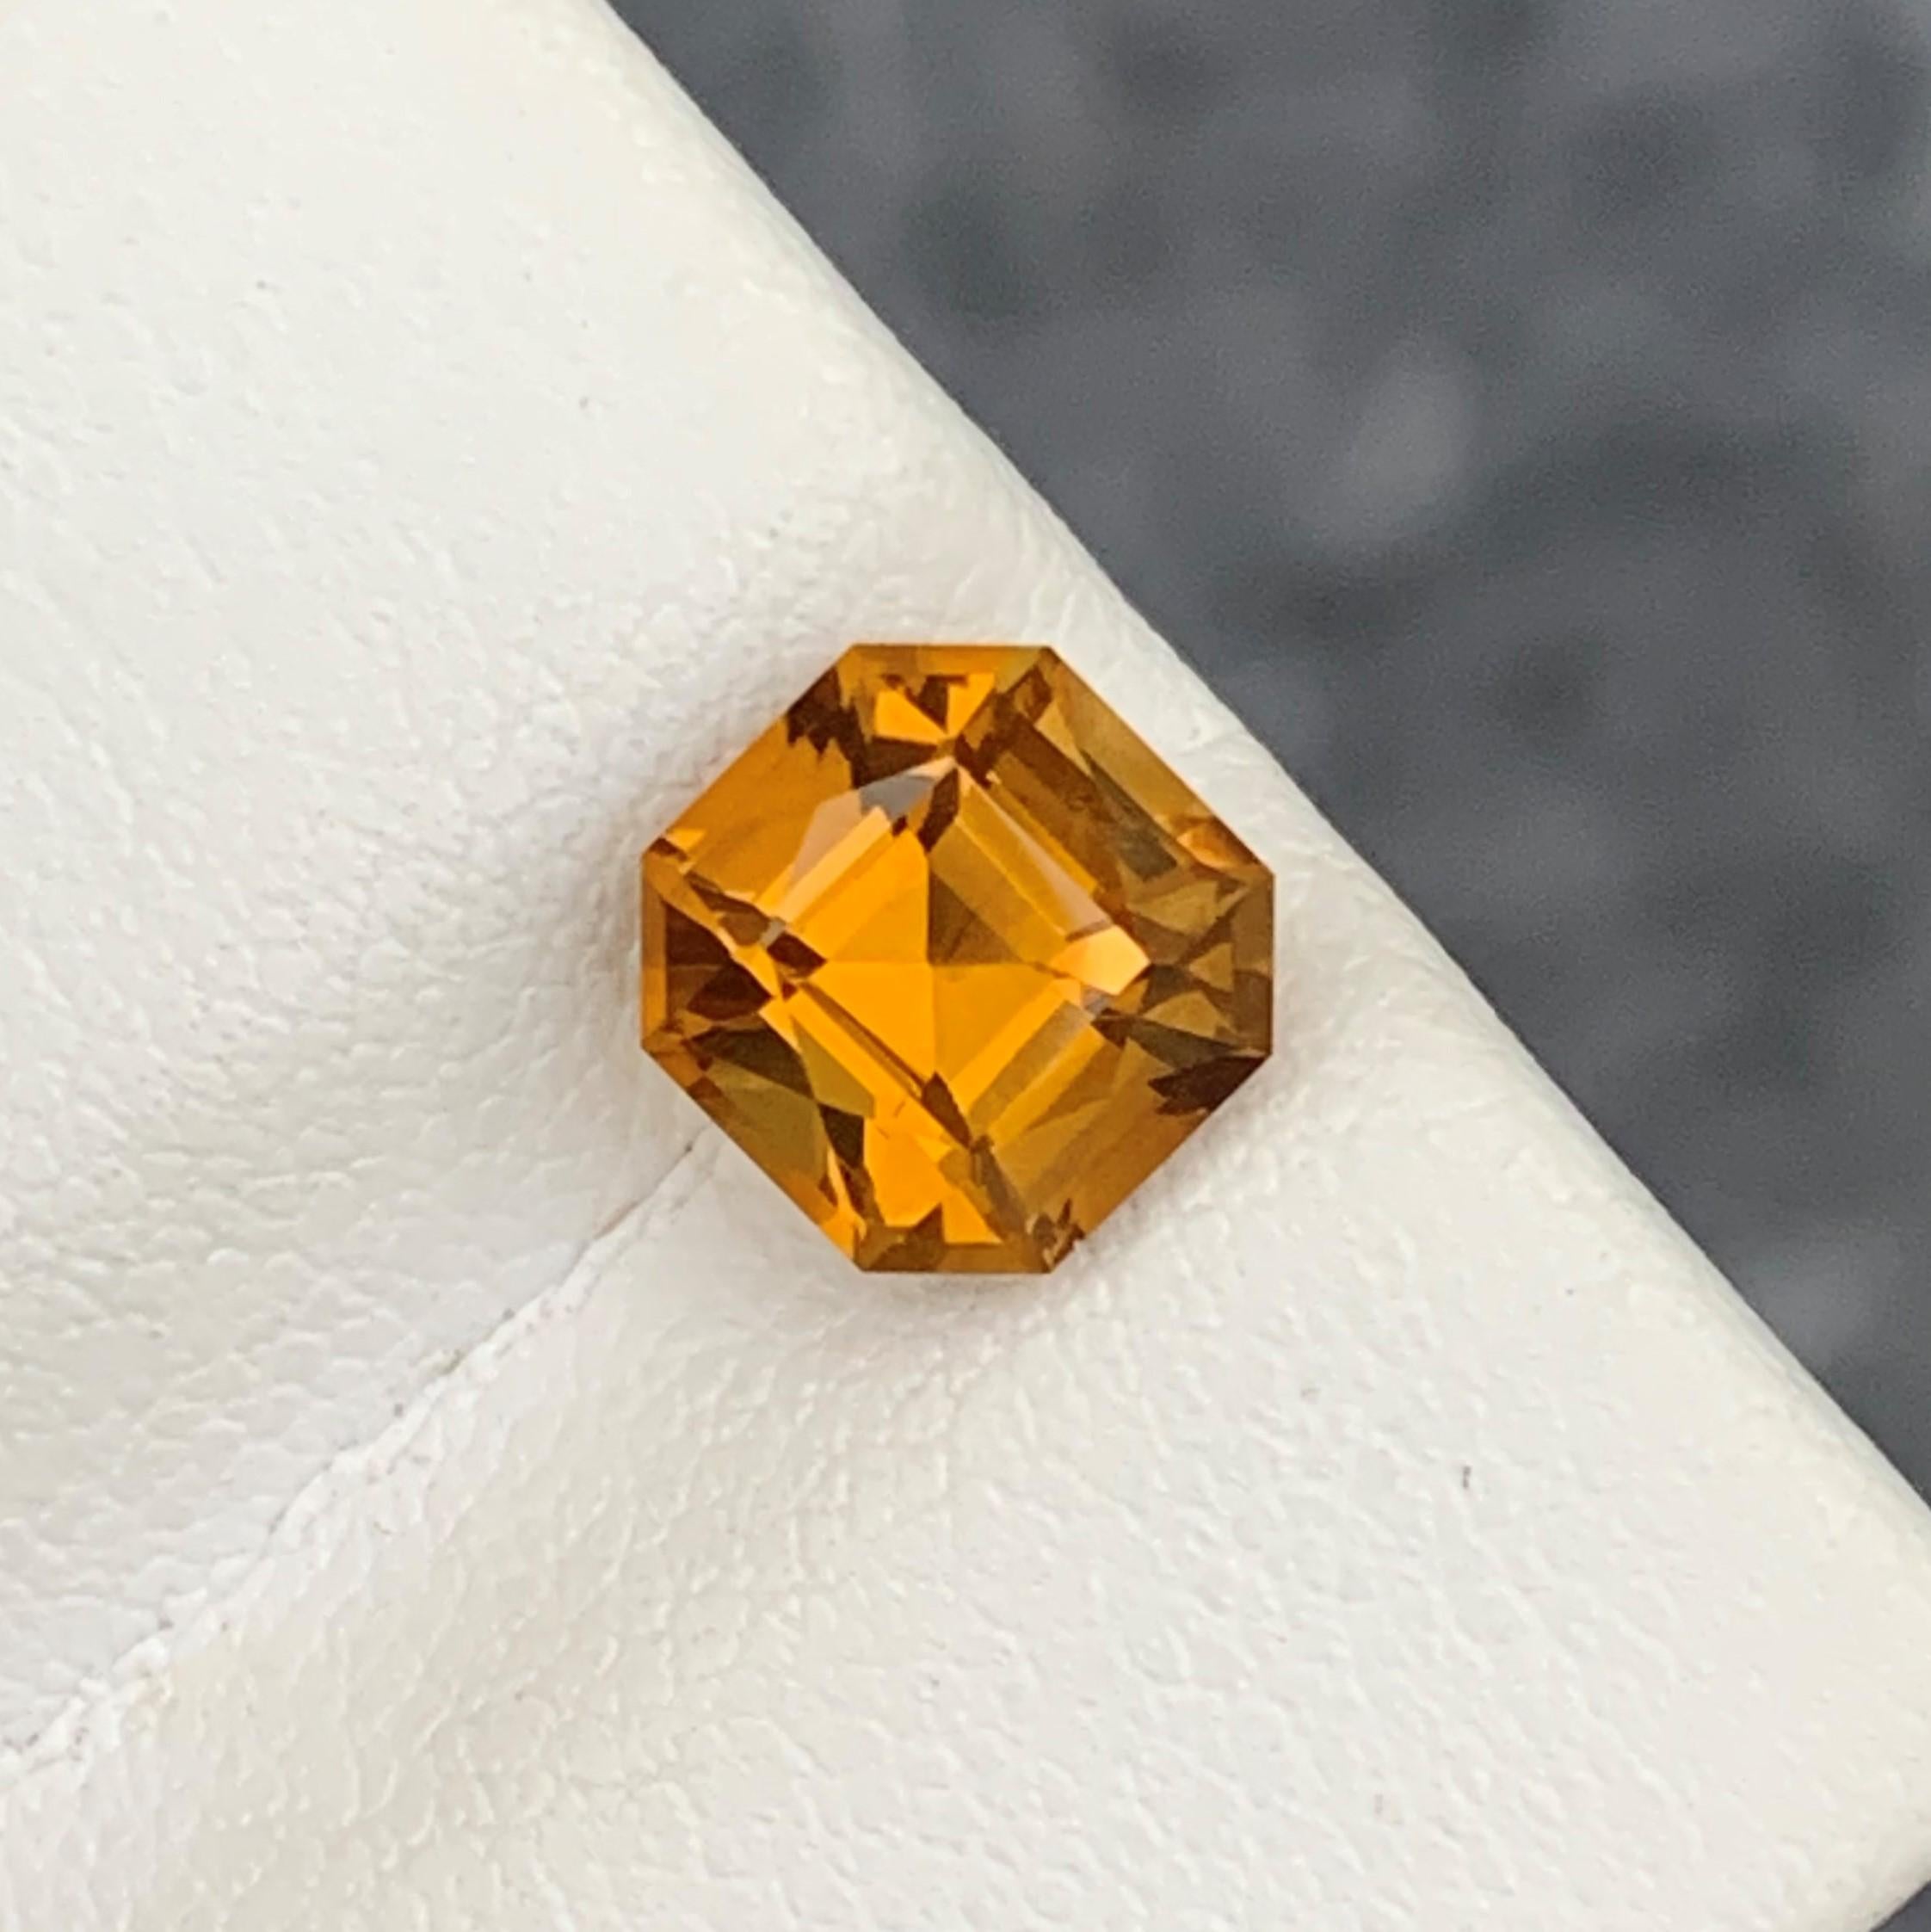 Gemstone Type : Citrine
Weight : 1.60 Carats
Dimensions : 7x6.9x5.5 mm
Clarity : Eye Clean(SI)
Origin : Brazil
Color: Yellow
Shape: Octagon
Certificate: On Demand
Month: November
.
The Many Healing Properties of Citrine
Increase Optimism, And Sunny